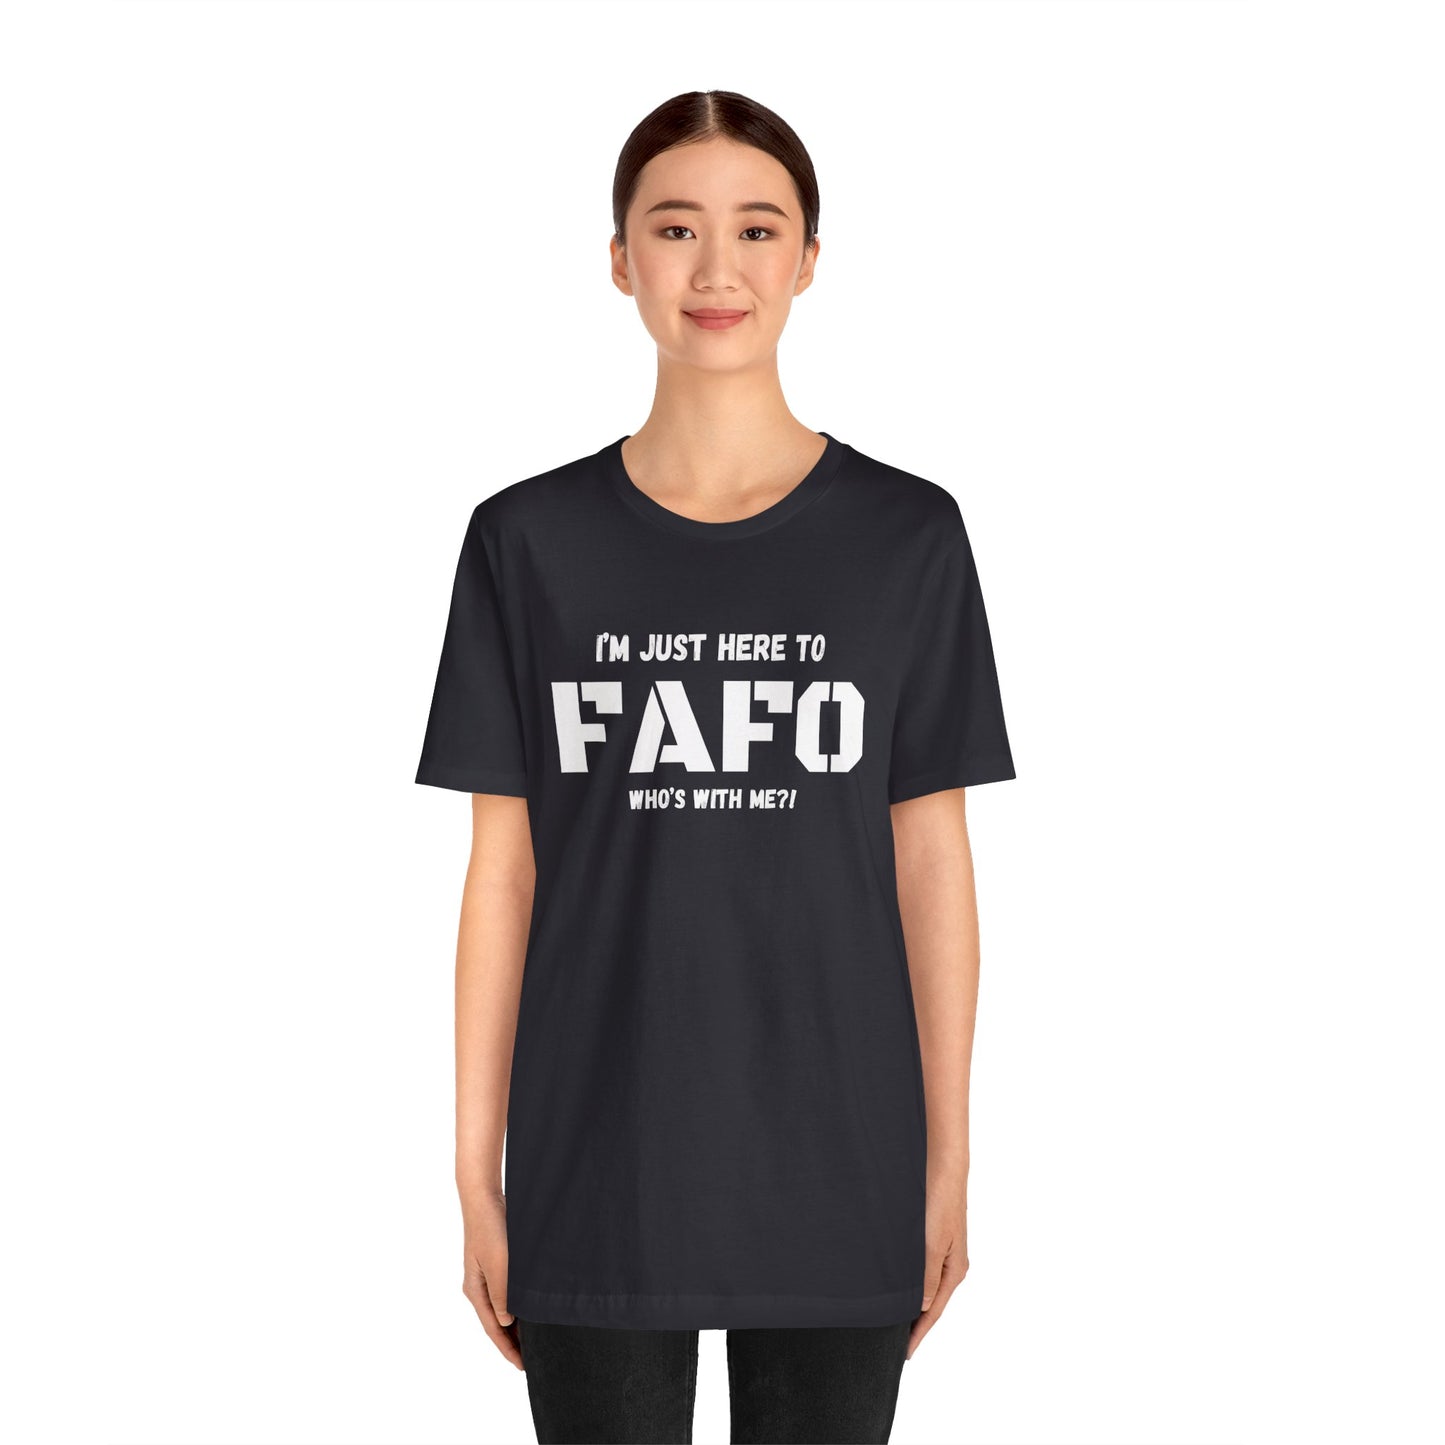 Unisex "I'm Just Here To FAFO" T-Shirt